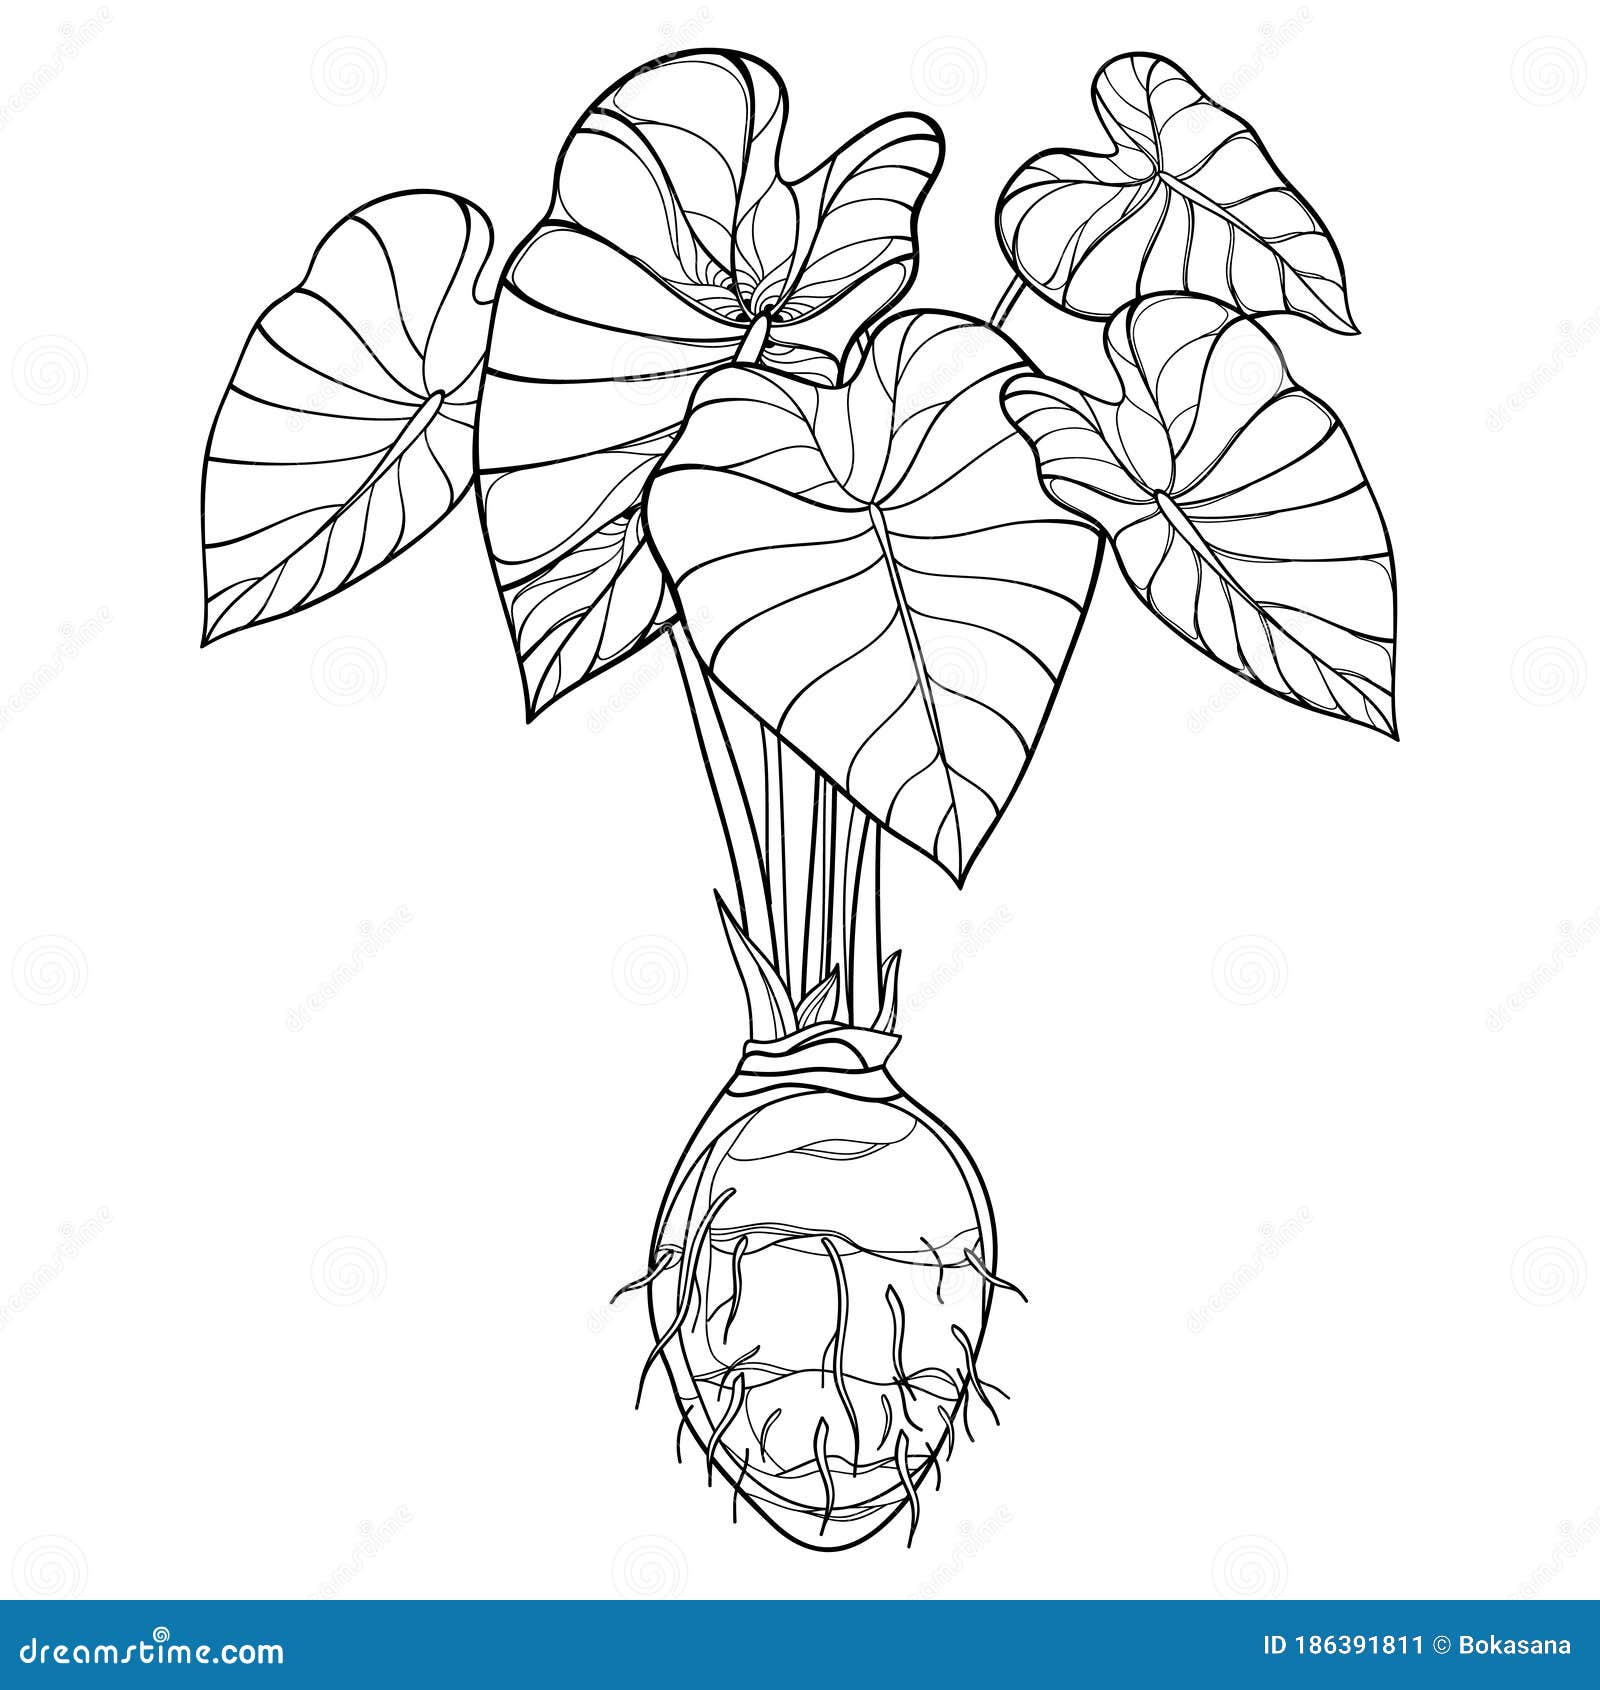  bush of outline tropical plant colocasia esculenta or or taro leaf bunch with corm in black  on white.